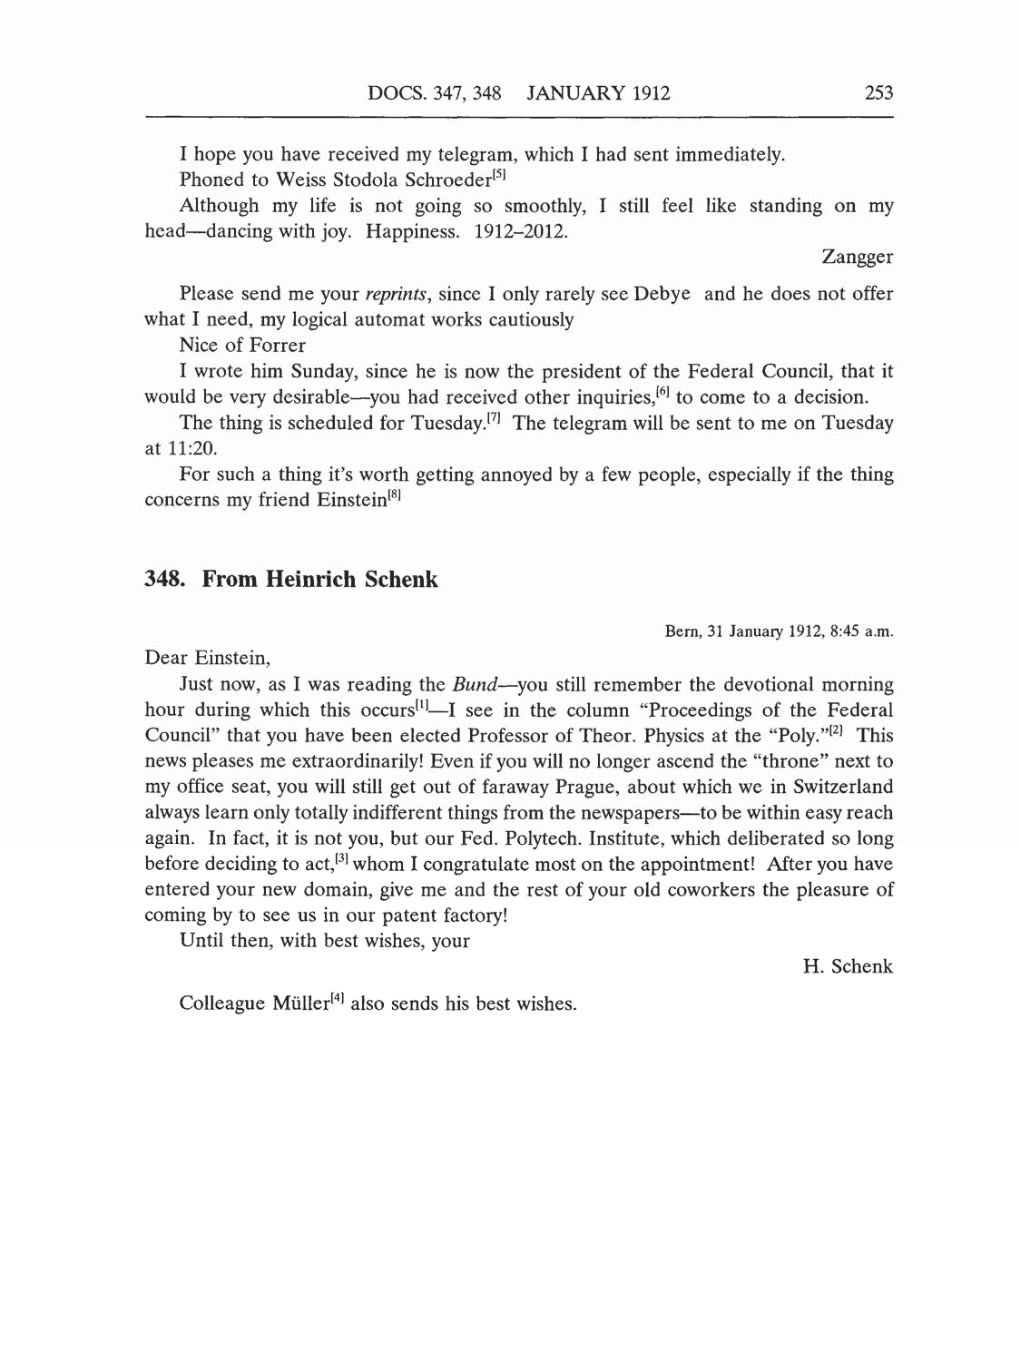 Volume 5: The Swiss Years: Correspondence, 1902-1914 (English translation supplement) page 253